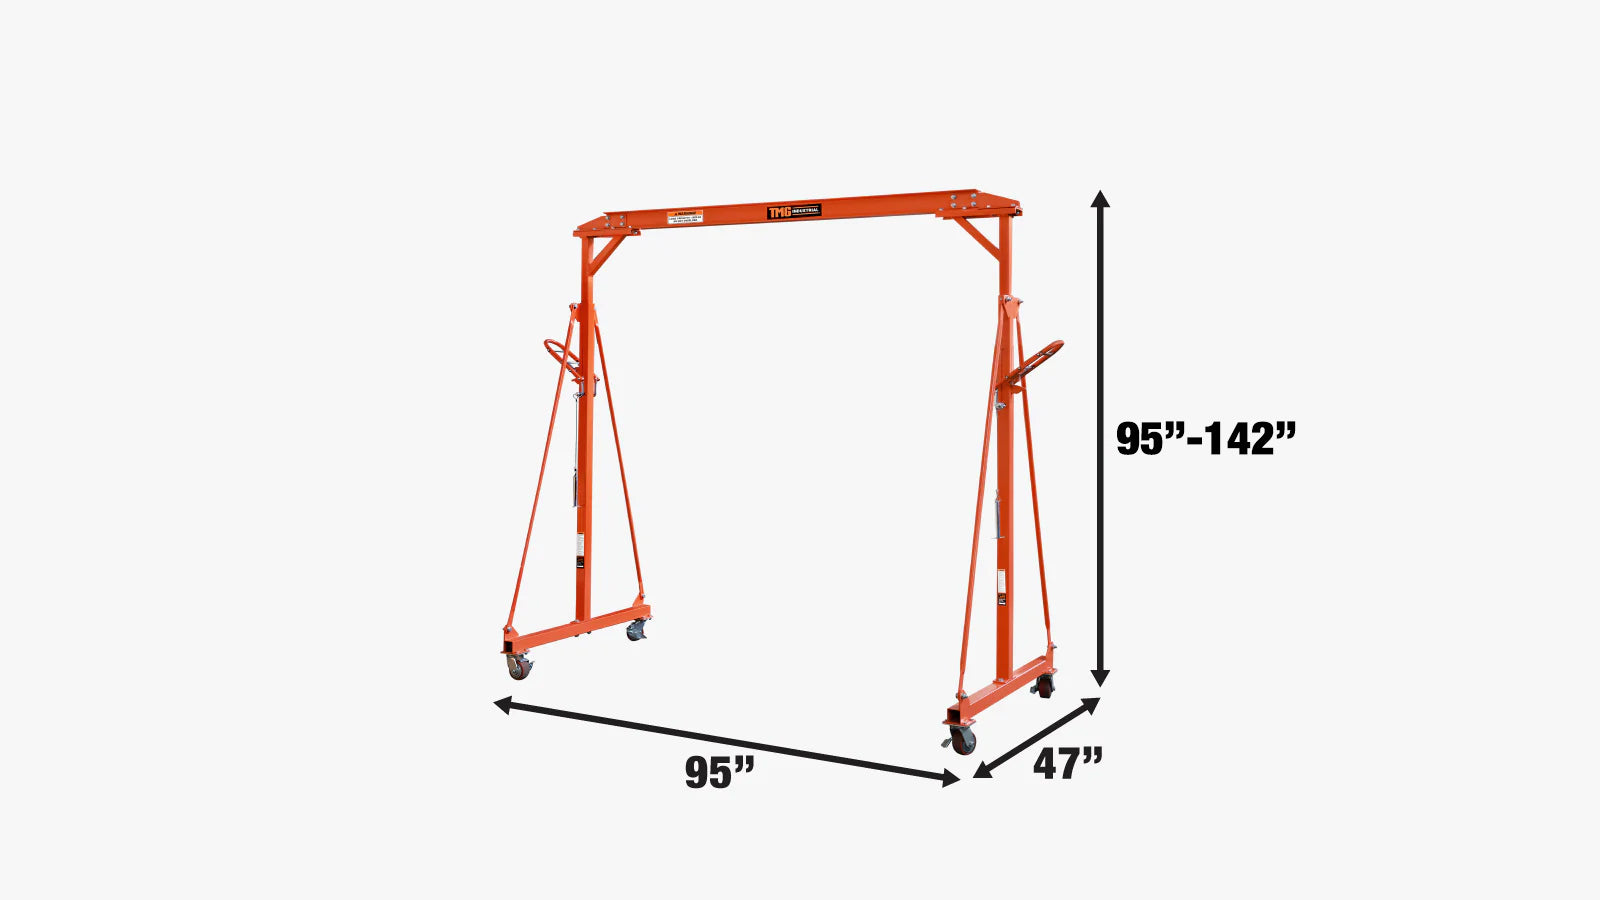 TMG Industrial 1100-lb Adjustable Height All-Steel Gantry Crane, Auto-Lock, 95” Min. Height, 142” Max. Height, Locking Swivel Caster Wheels, TMG-AGC06(Previously TMG-AGC05)-specifications-image